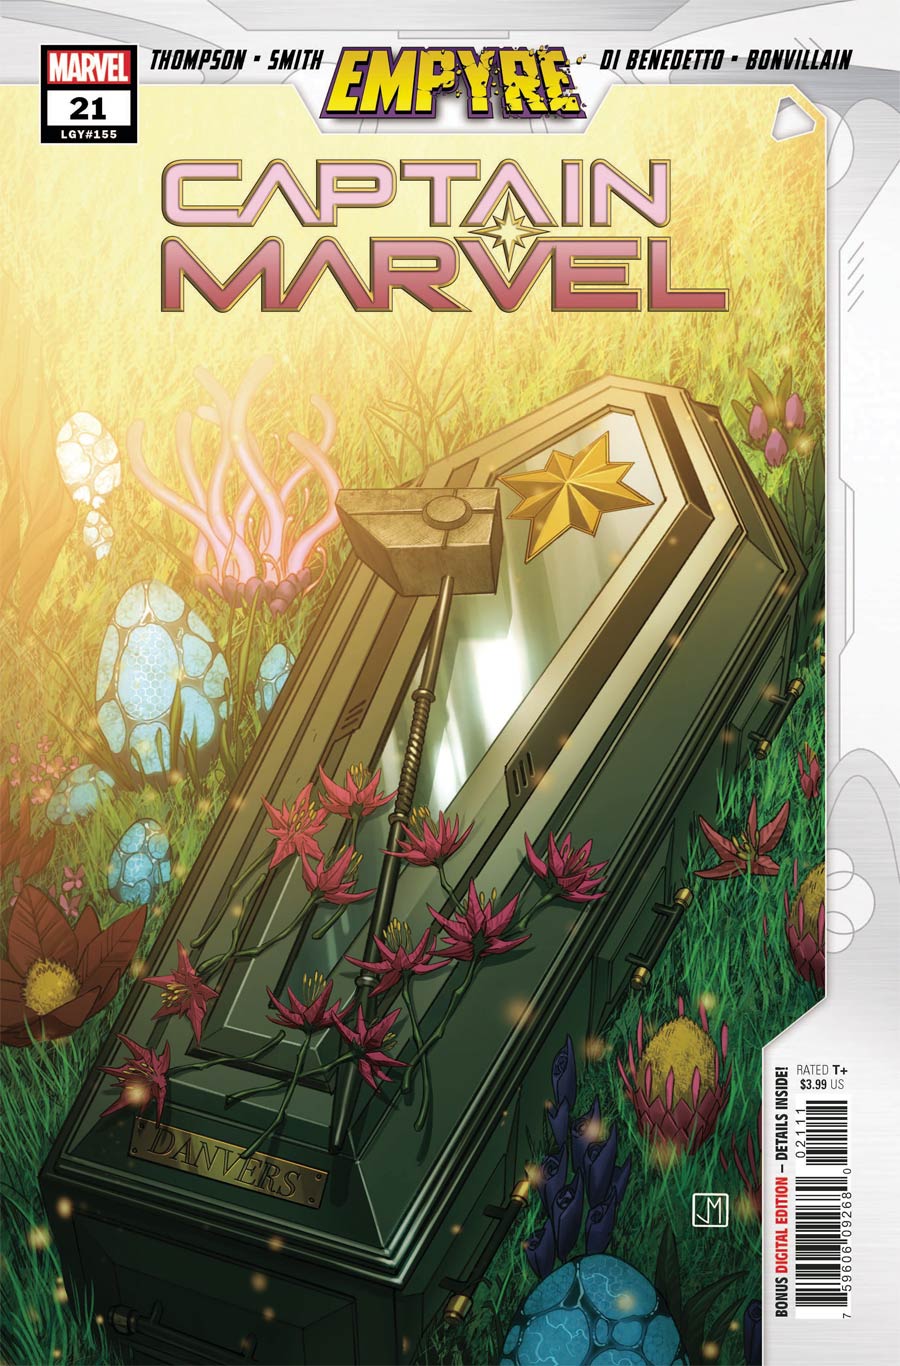 Captain Marvel Vol 9 #21 Cover A Regular Jorge Molina Cover (Empyre Tie-In)